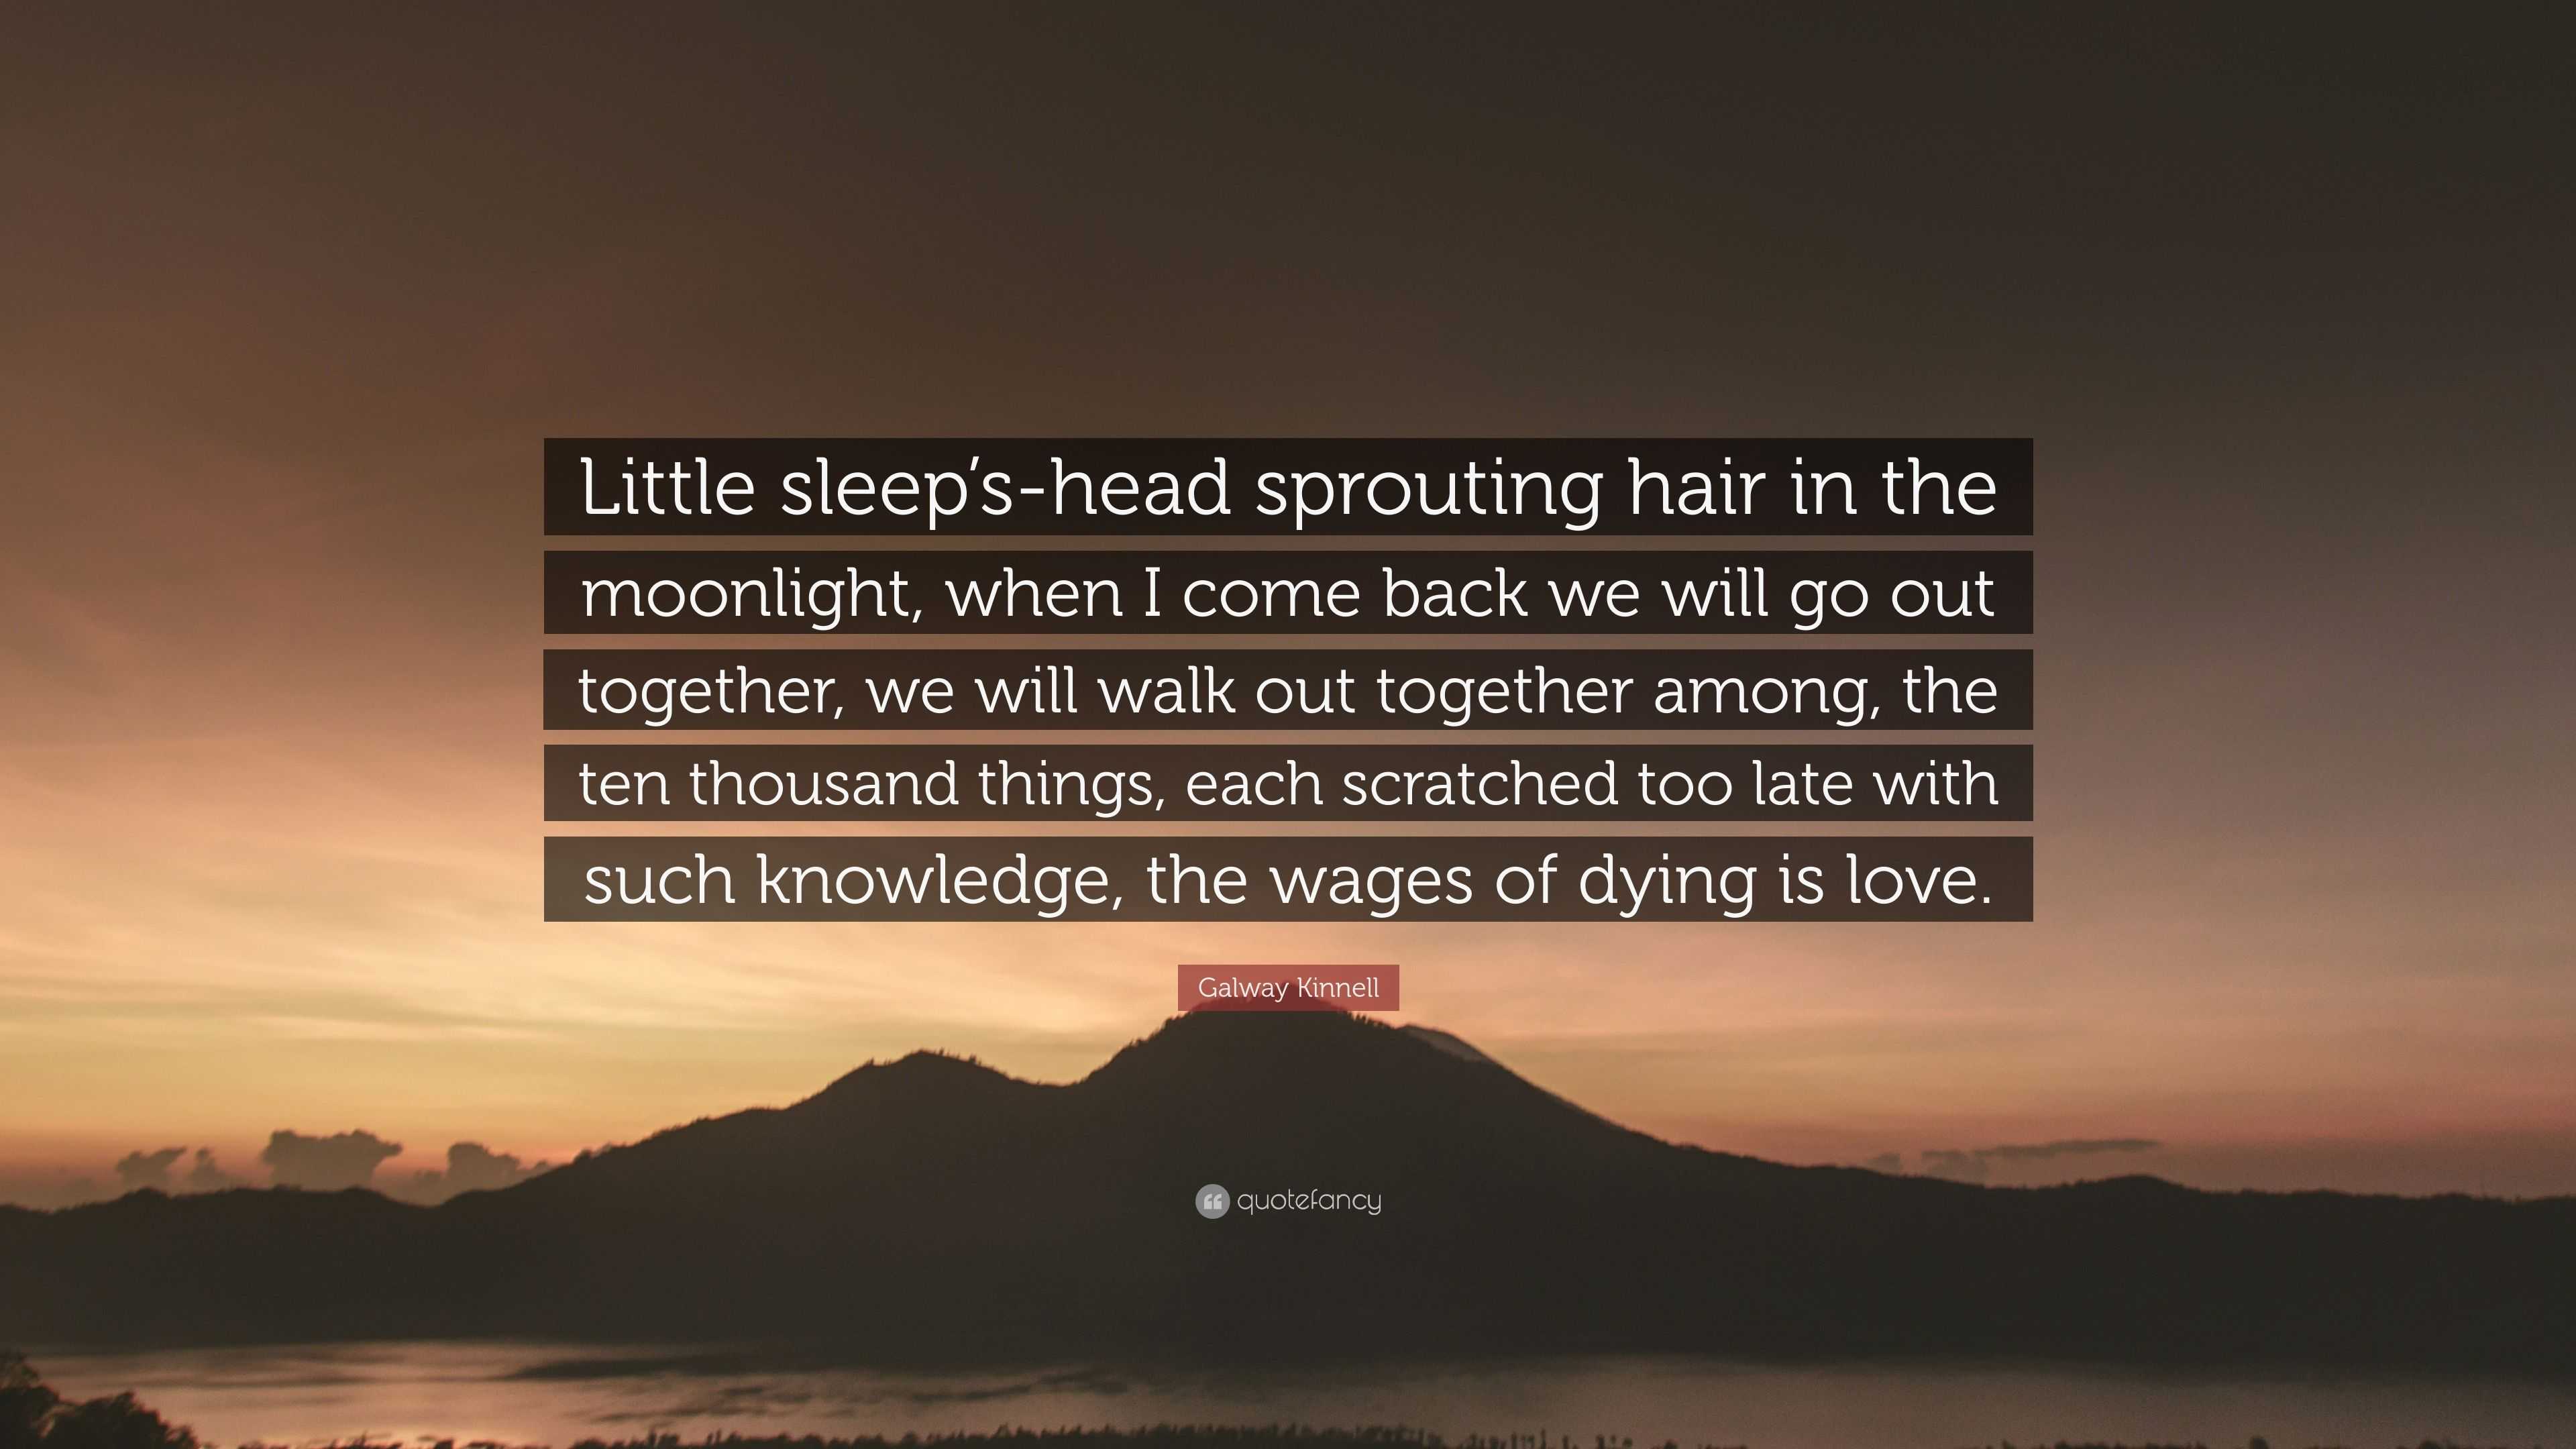 Galway Kinnell Quote Little Sleep S Head Sprouting Hair In The Moonlight When I Come Back We Will Go Out Together We Will Walk Out Together